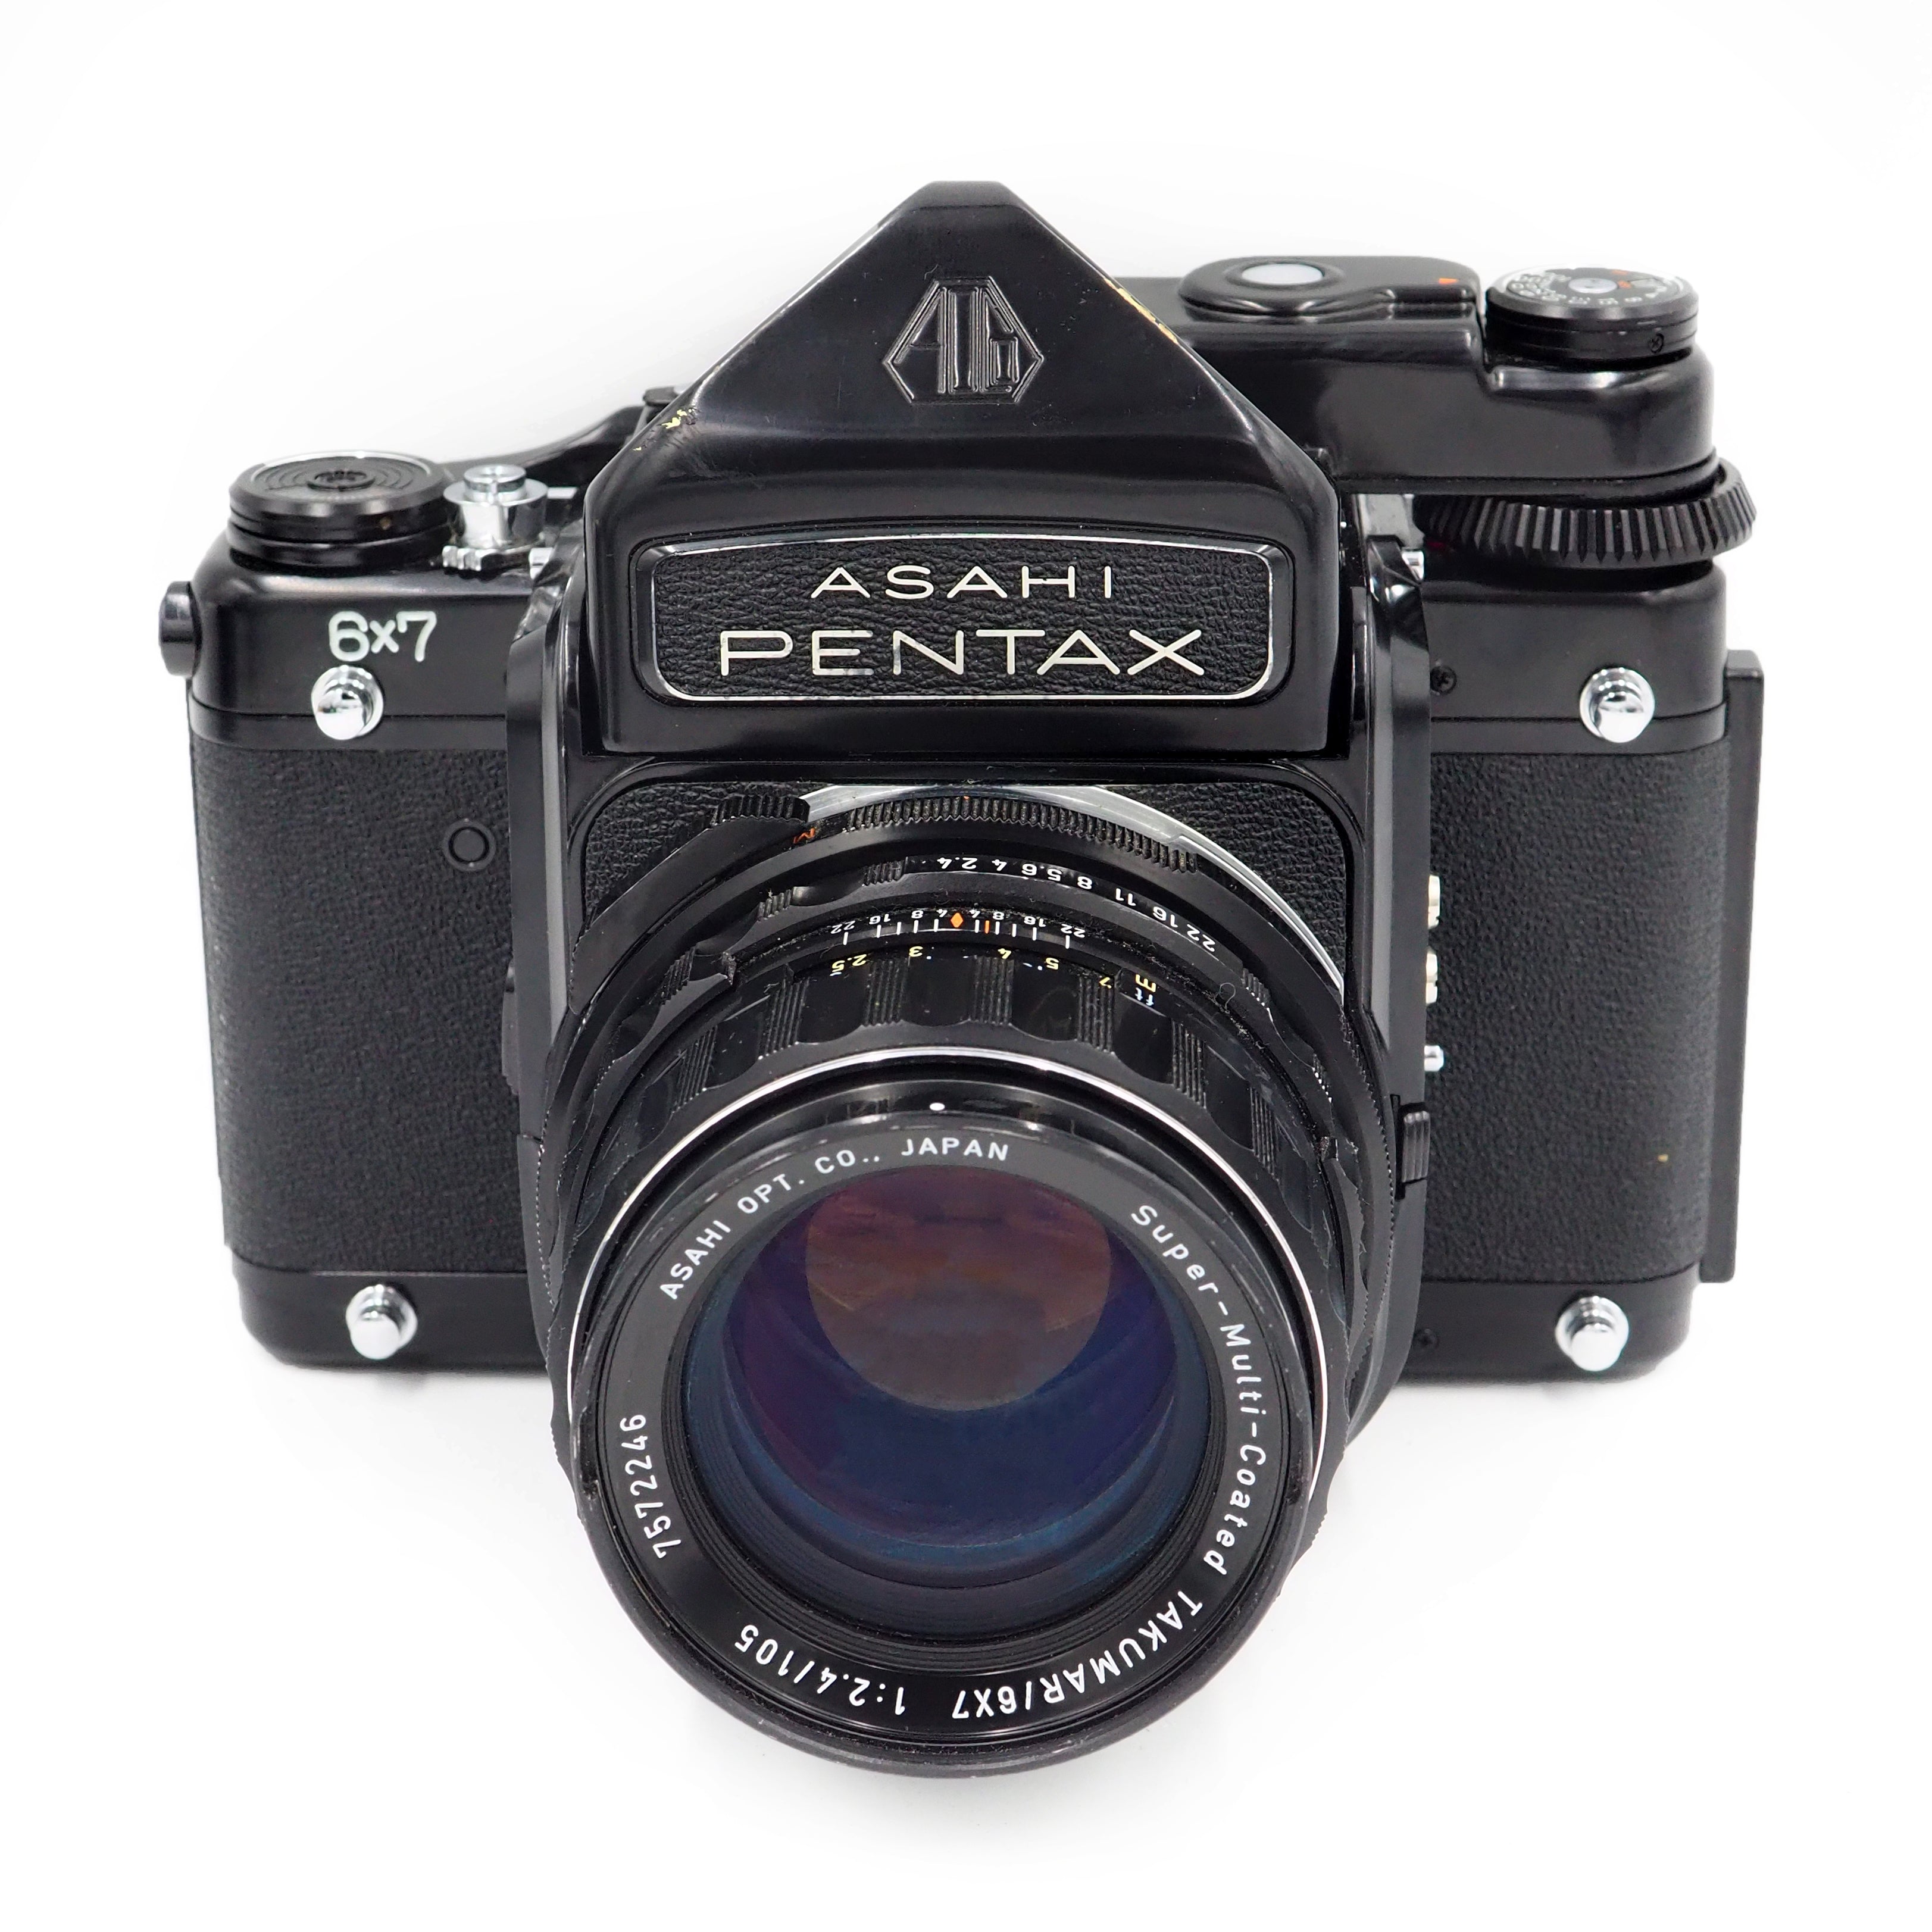 Pentax 6x7 With Takumar mm f.4 Lens See Description  USED